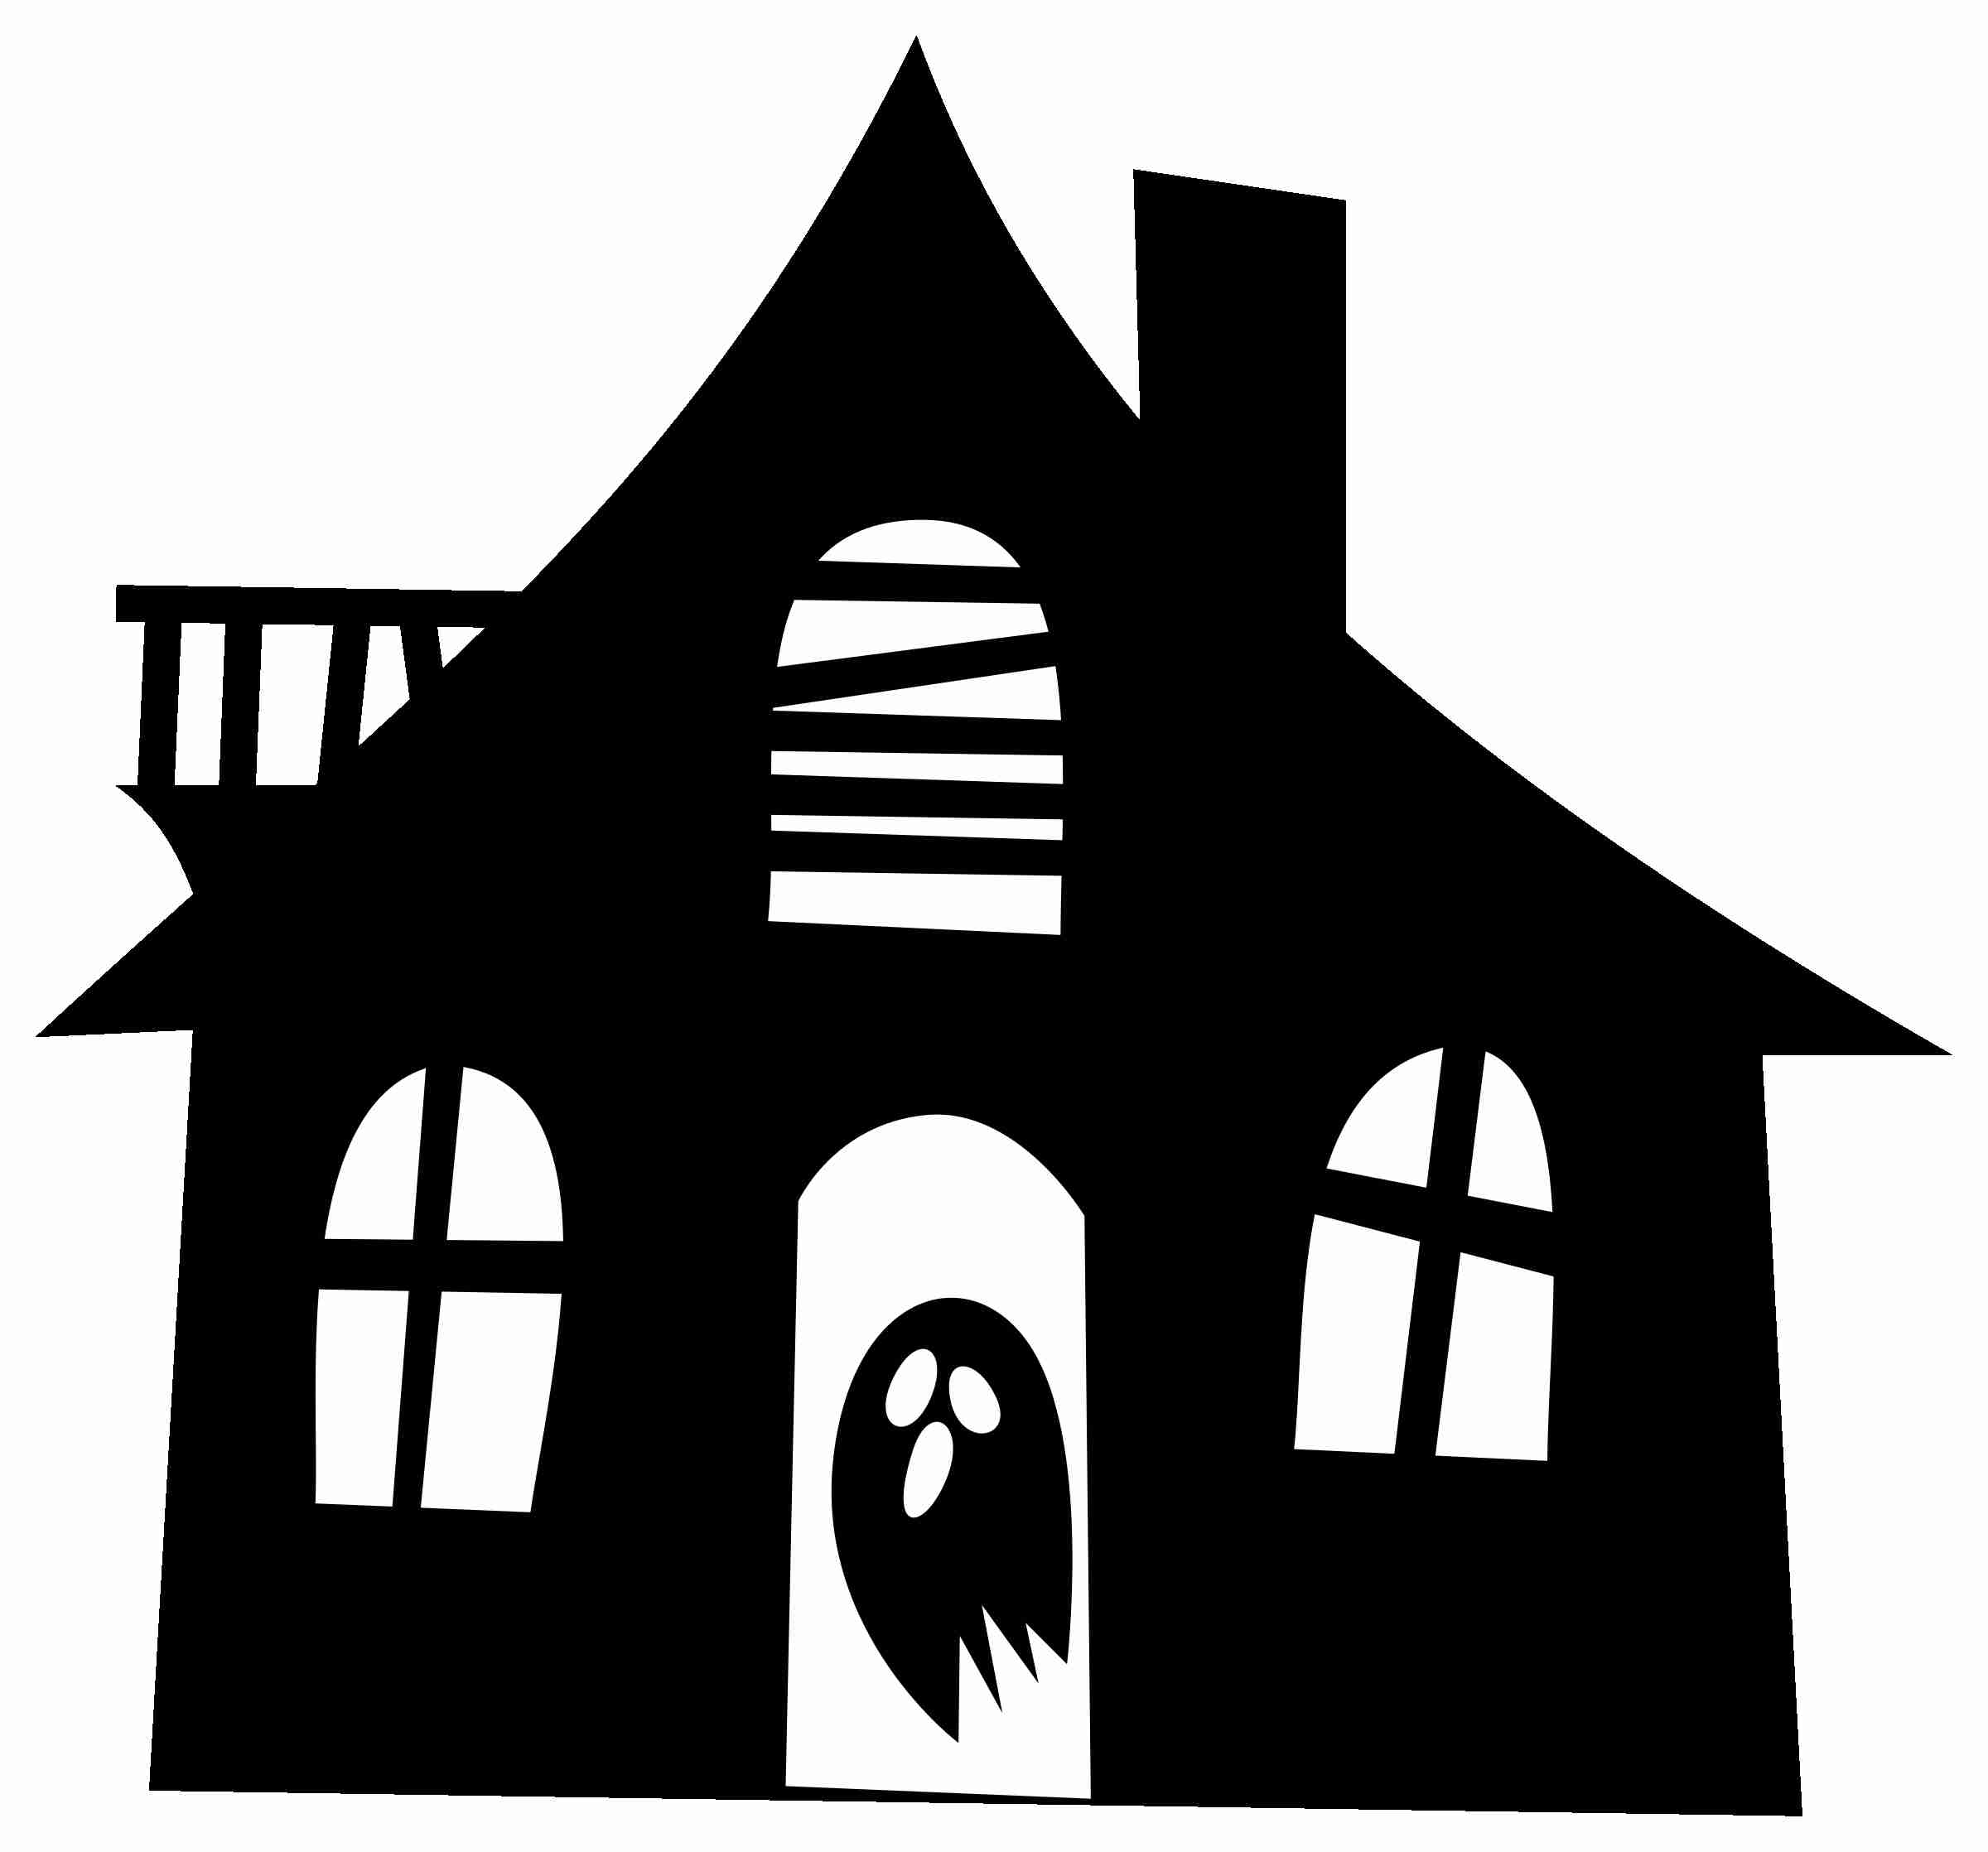 Haunted House Silhouette Clip Art at GetDrawings Free download